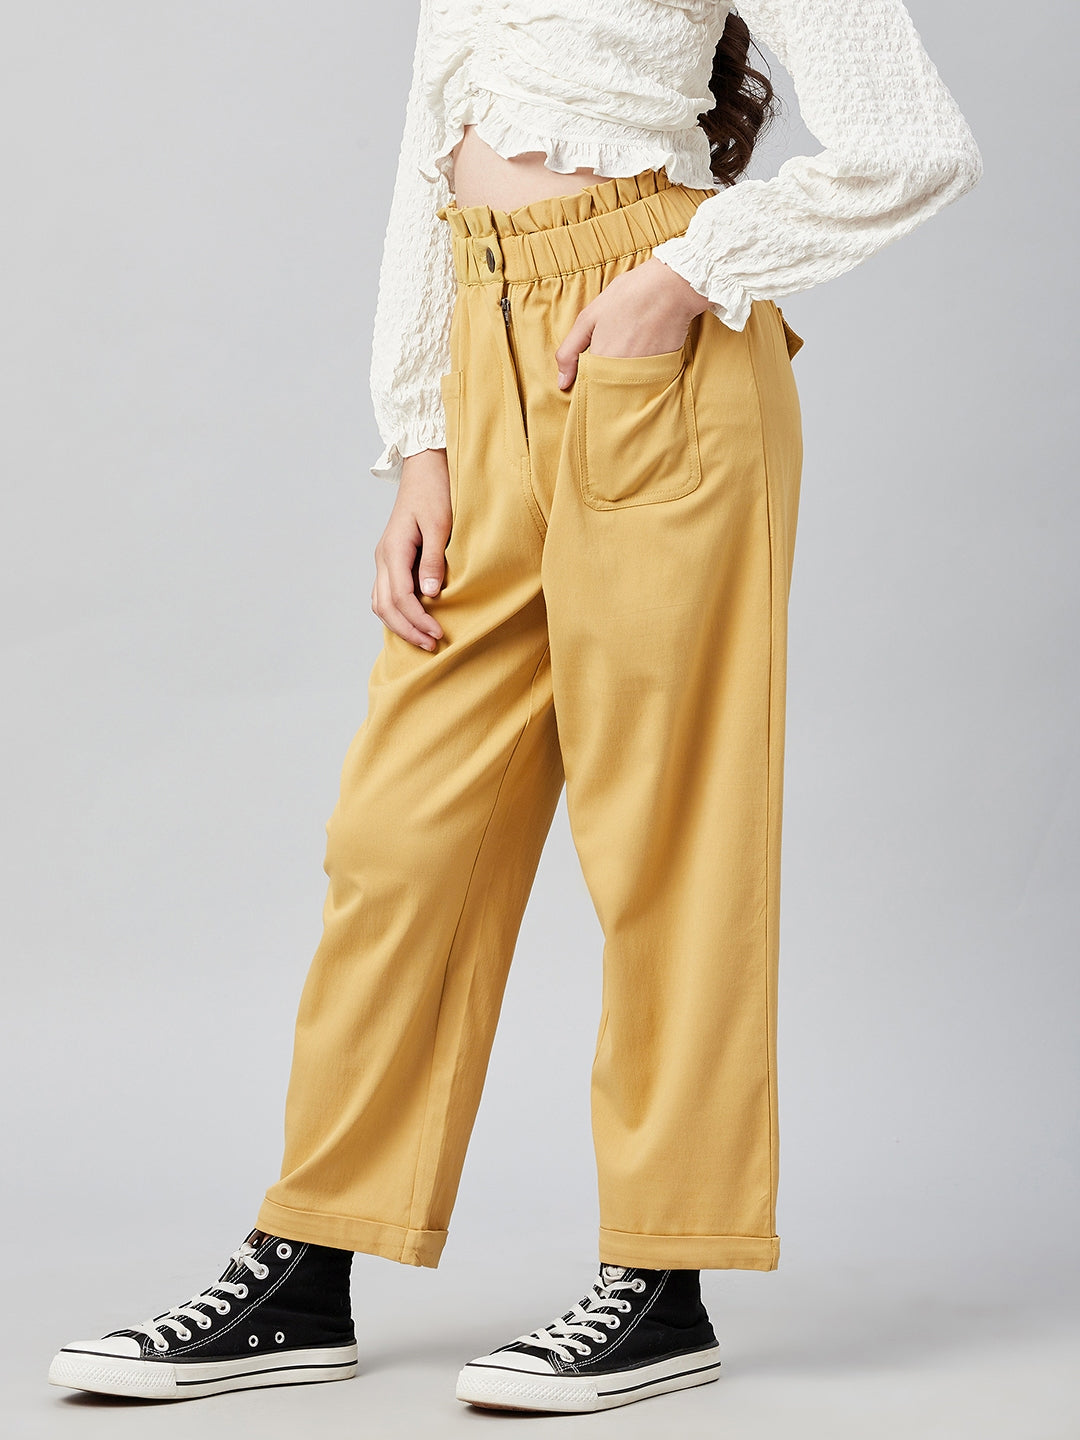 Athena Girl Girls Yellow Relaxed Straight Leg Straight Fit High-Rise Trousers - Athena Lifestyle